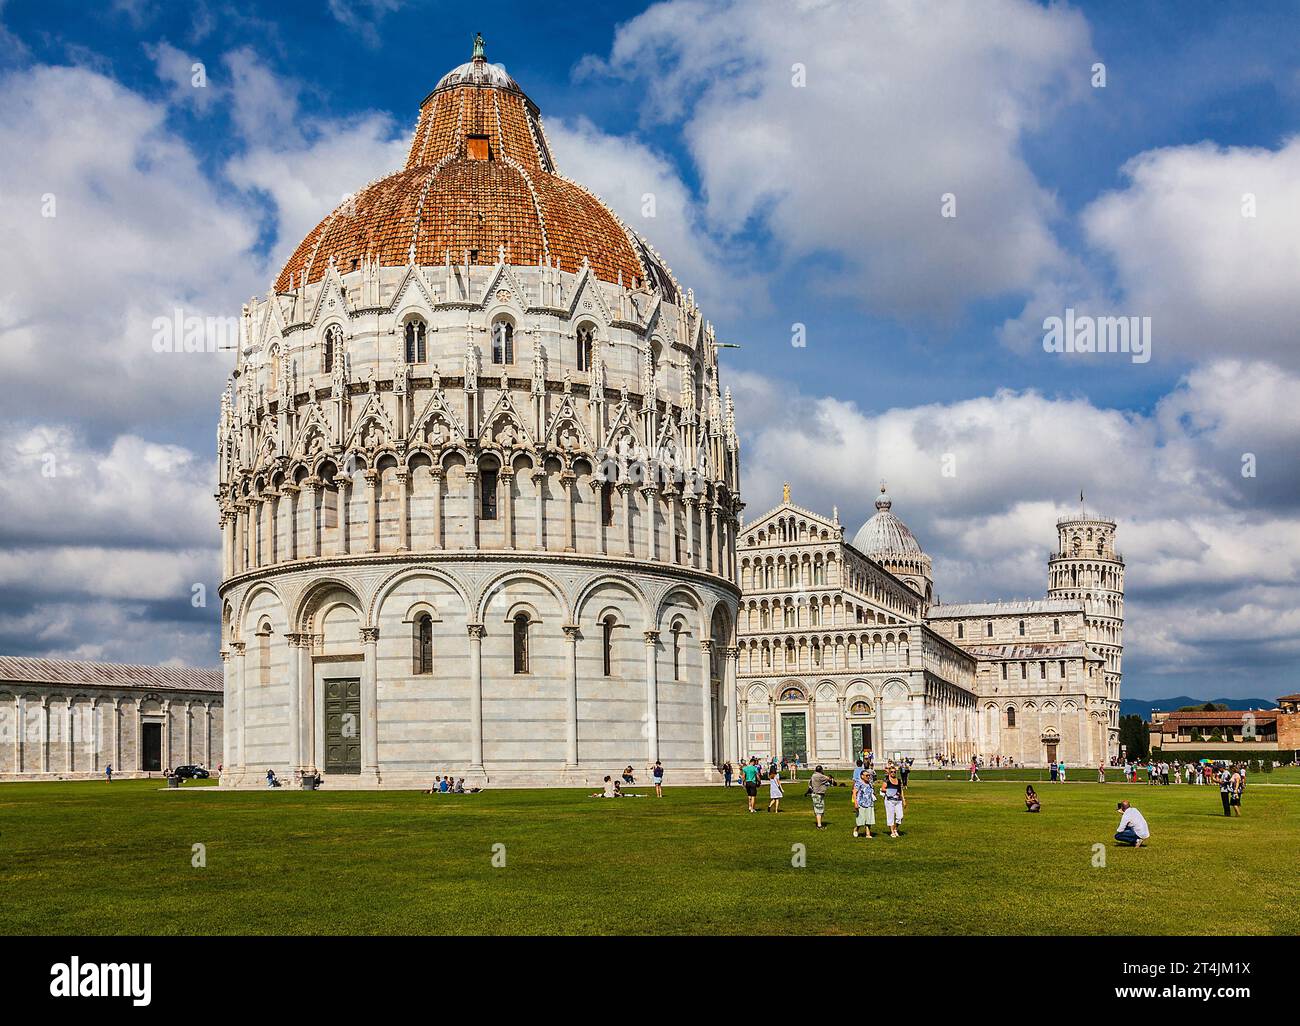 A view of the cathedral in Tuscany, right next to the leaning tower of Pisa. Stock Photo